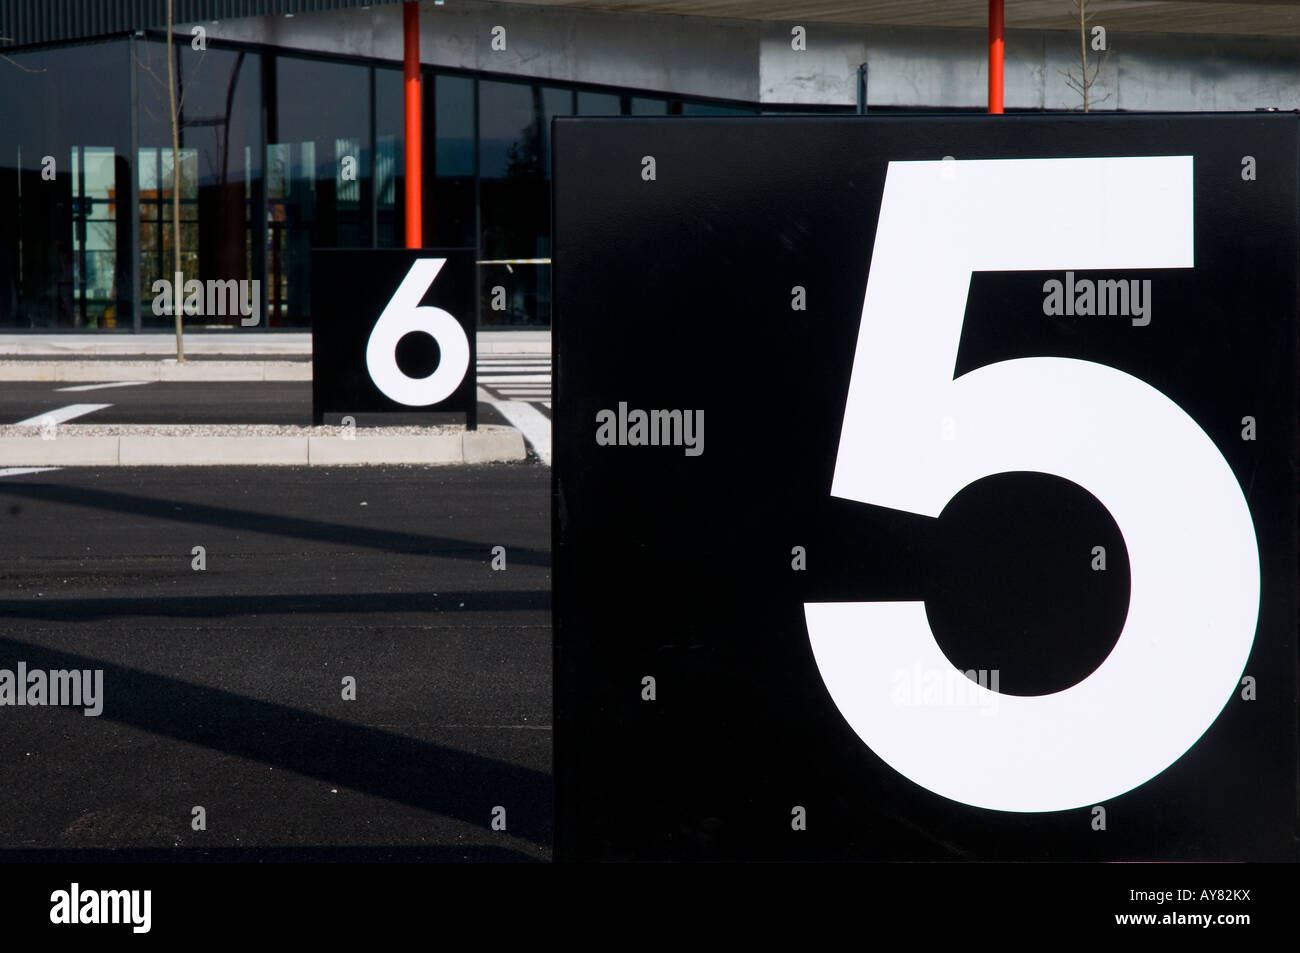 numbering in a car park Stock Photo